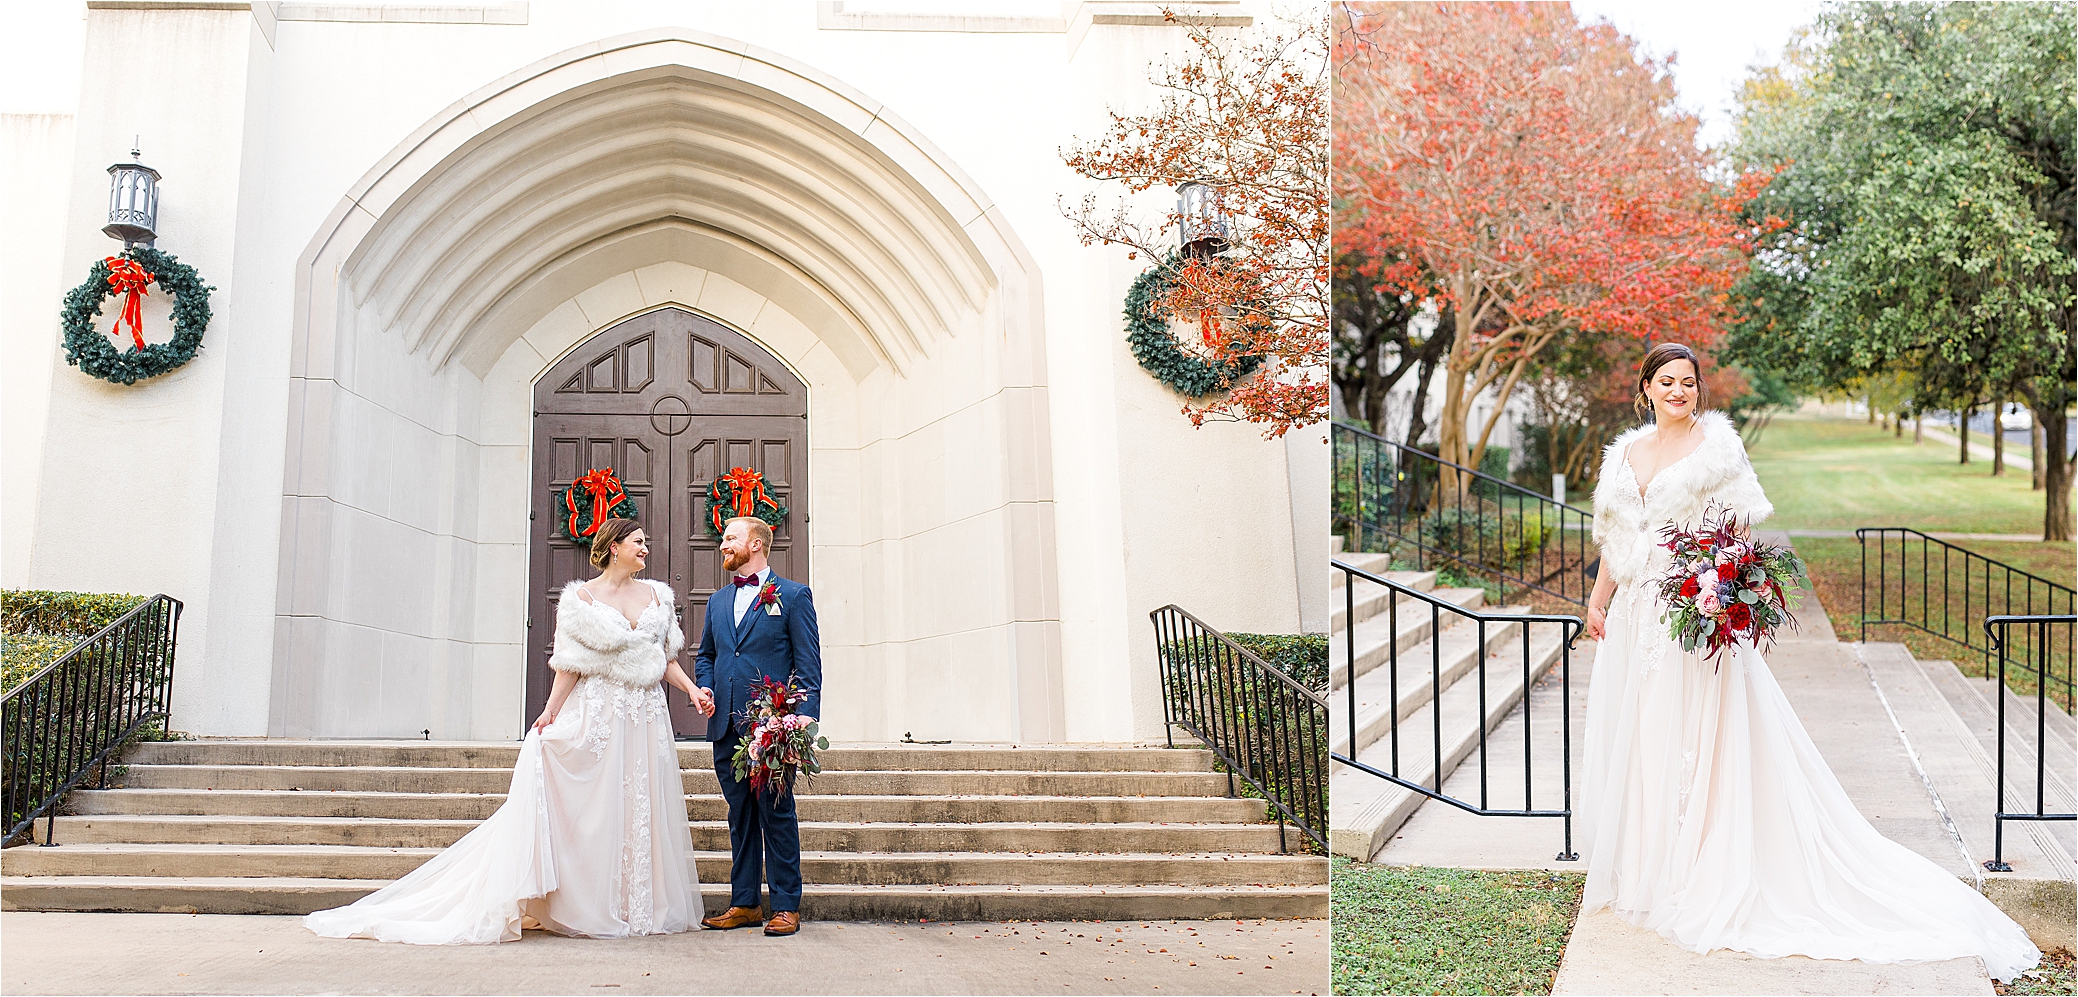 A bride and groom hold hands in front of a beautiful arch and wooden door after their Alamo Heights United Methodist Ceremony with Christmas wreaths surround them 